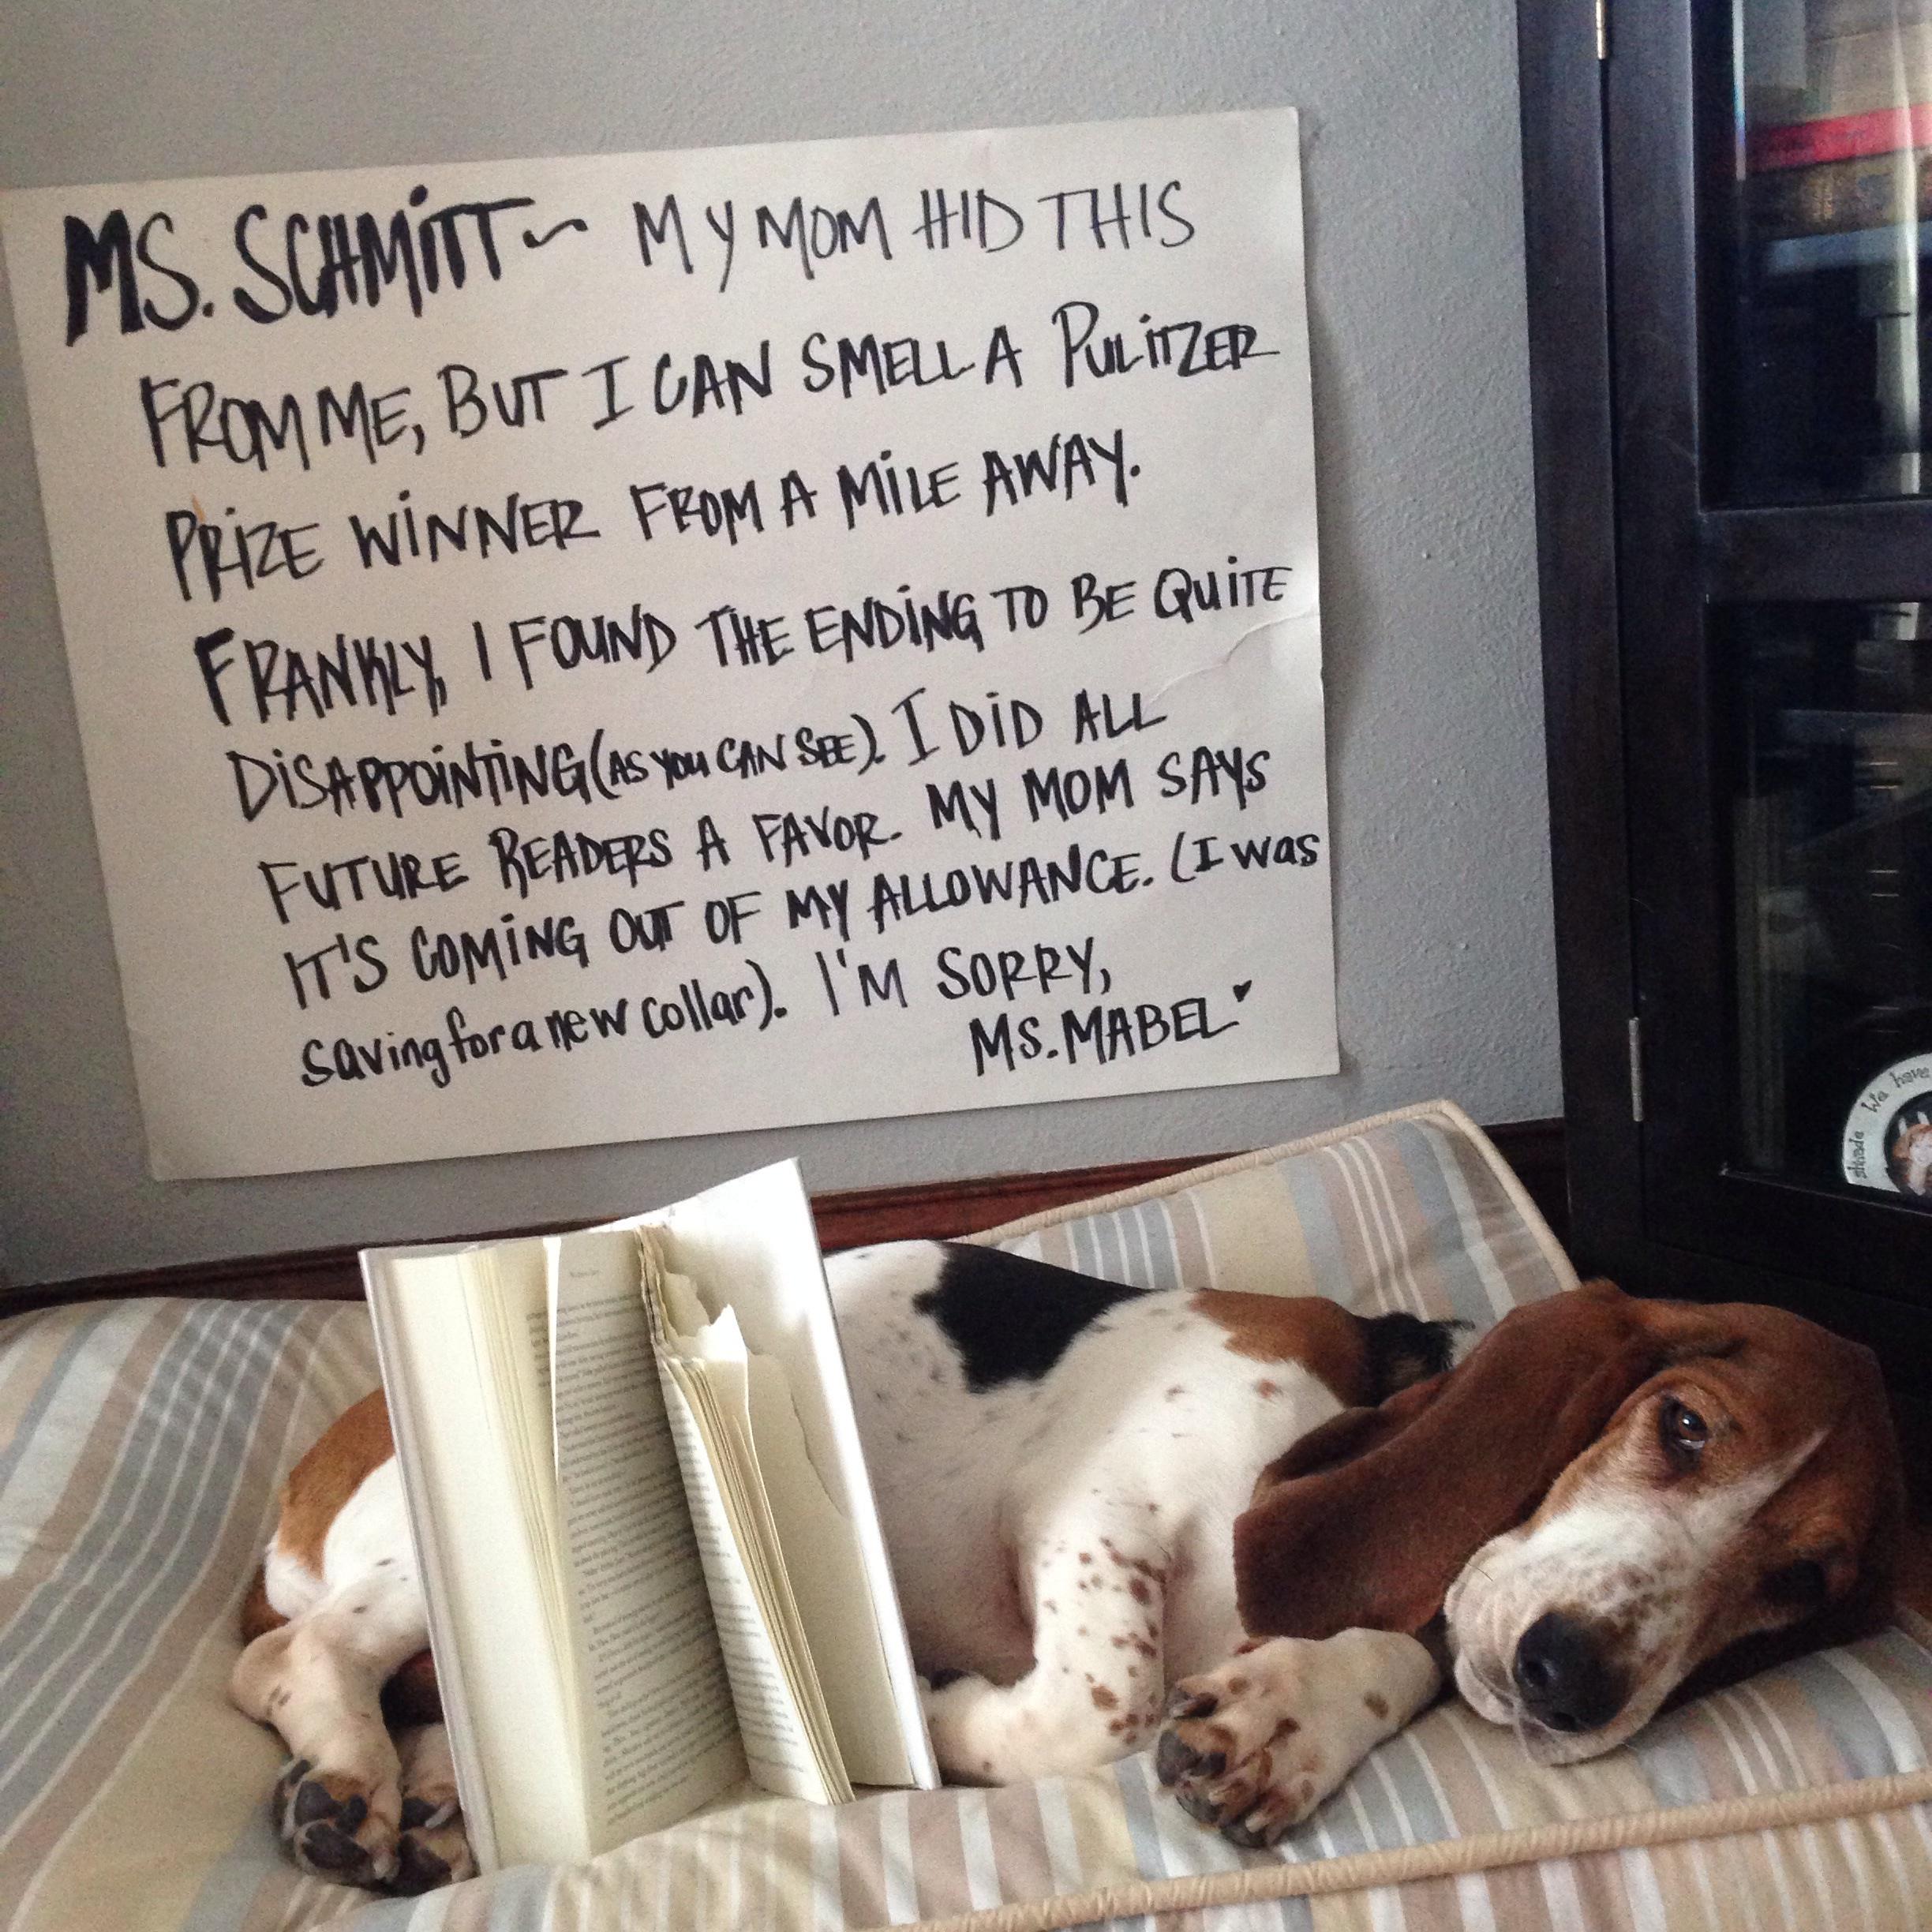 A Basset Hound lying on its bed with a book and a note in the wall behind him that sayes - Ms. Schmit- my mom hid this from me but I can smell a pulitizer.. prize winner from a mile away. Frankly, I found the ending to be quite disappointing, I did all future readers a favor. My mom says it's coming out of my allowance. I was saving for a new collar. I'm sorry Ms. Mabel